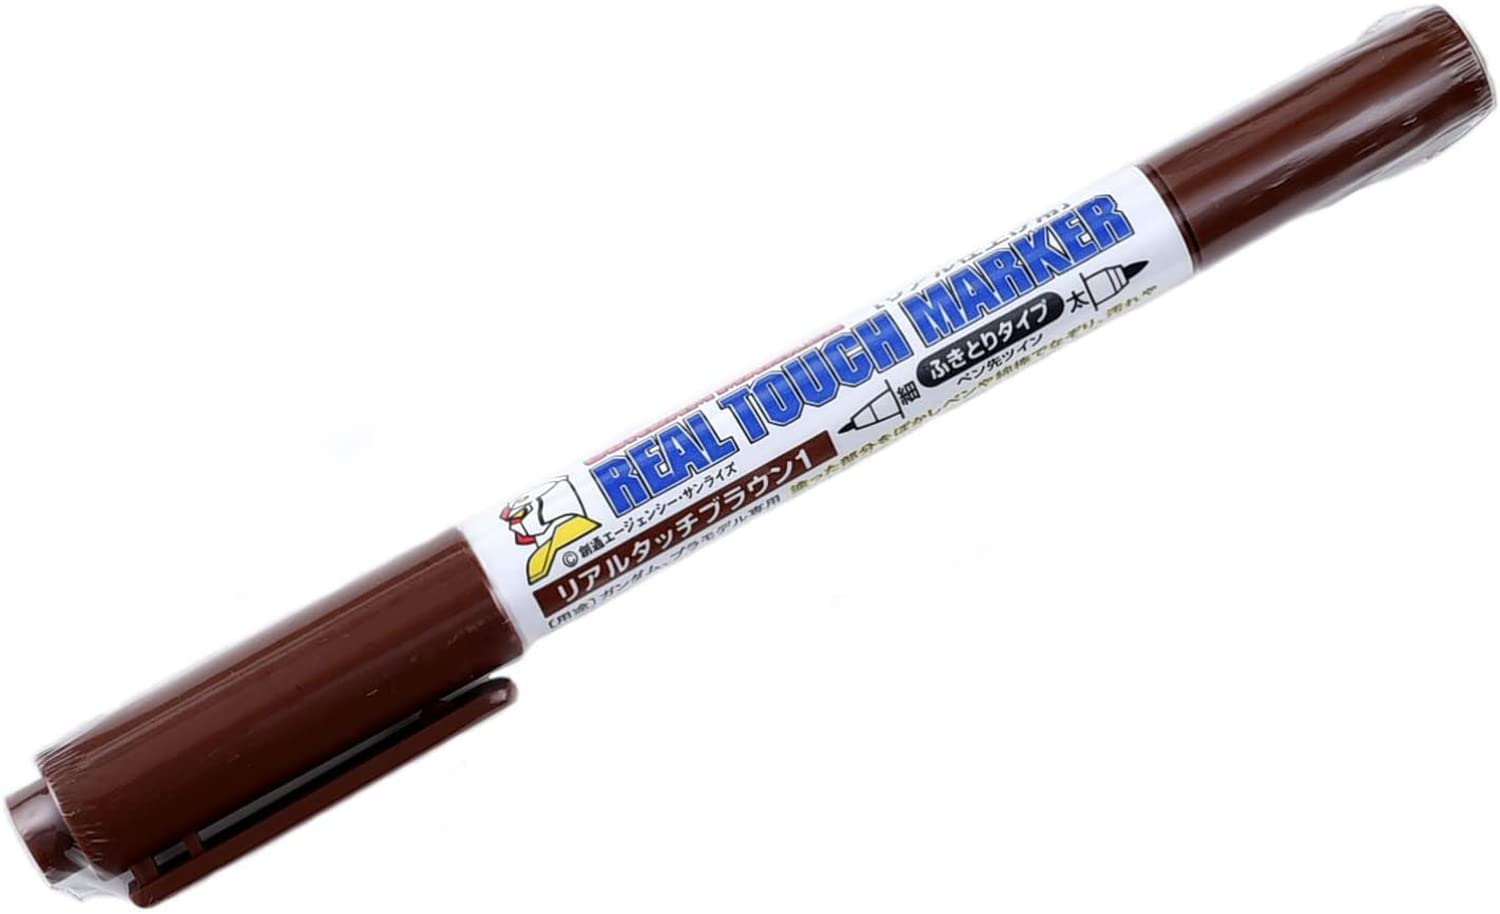 GM407 Gundam Marker, Real Touch Marker, Brown 1, Paint Tool for